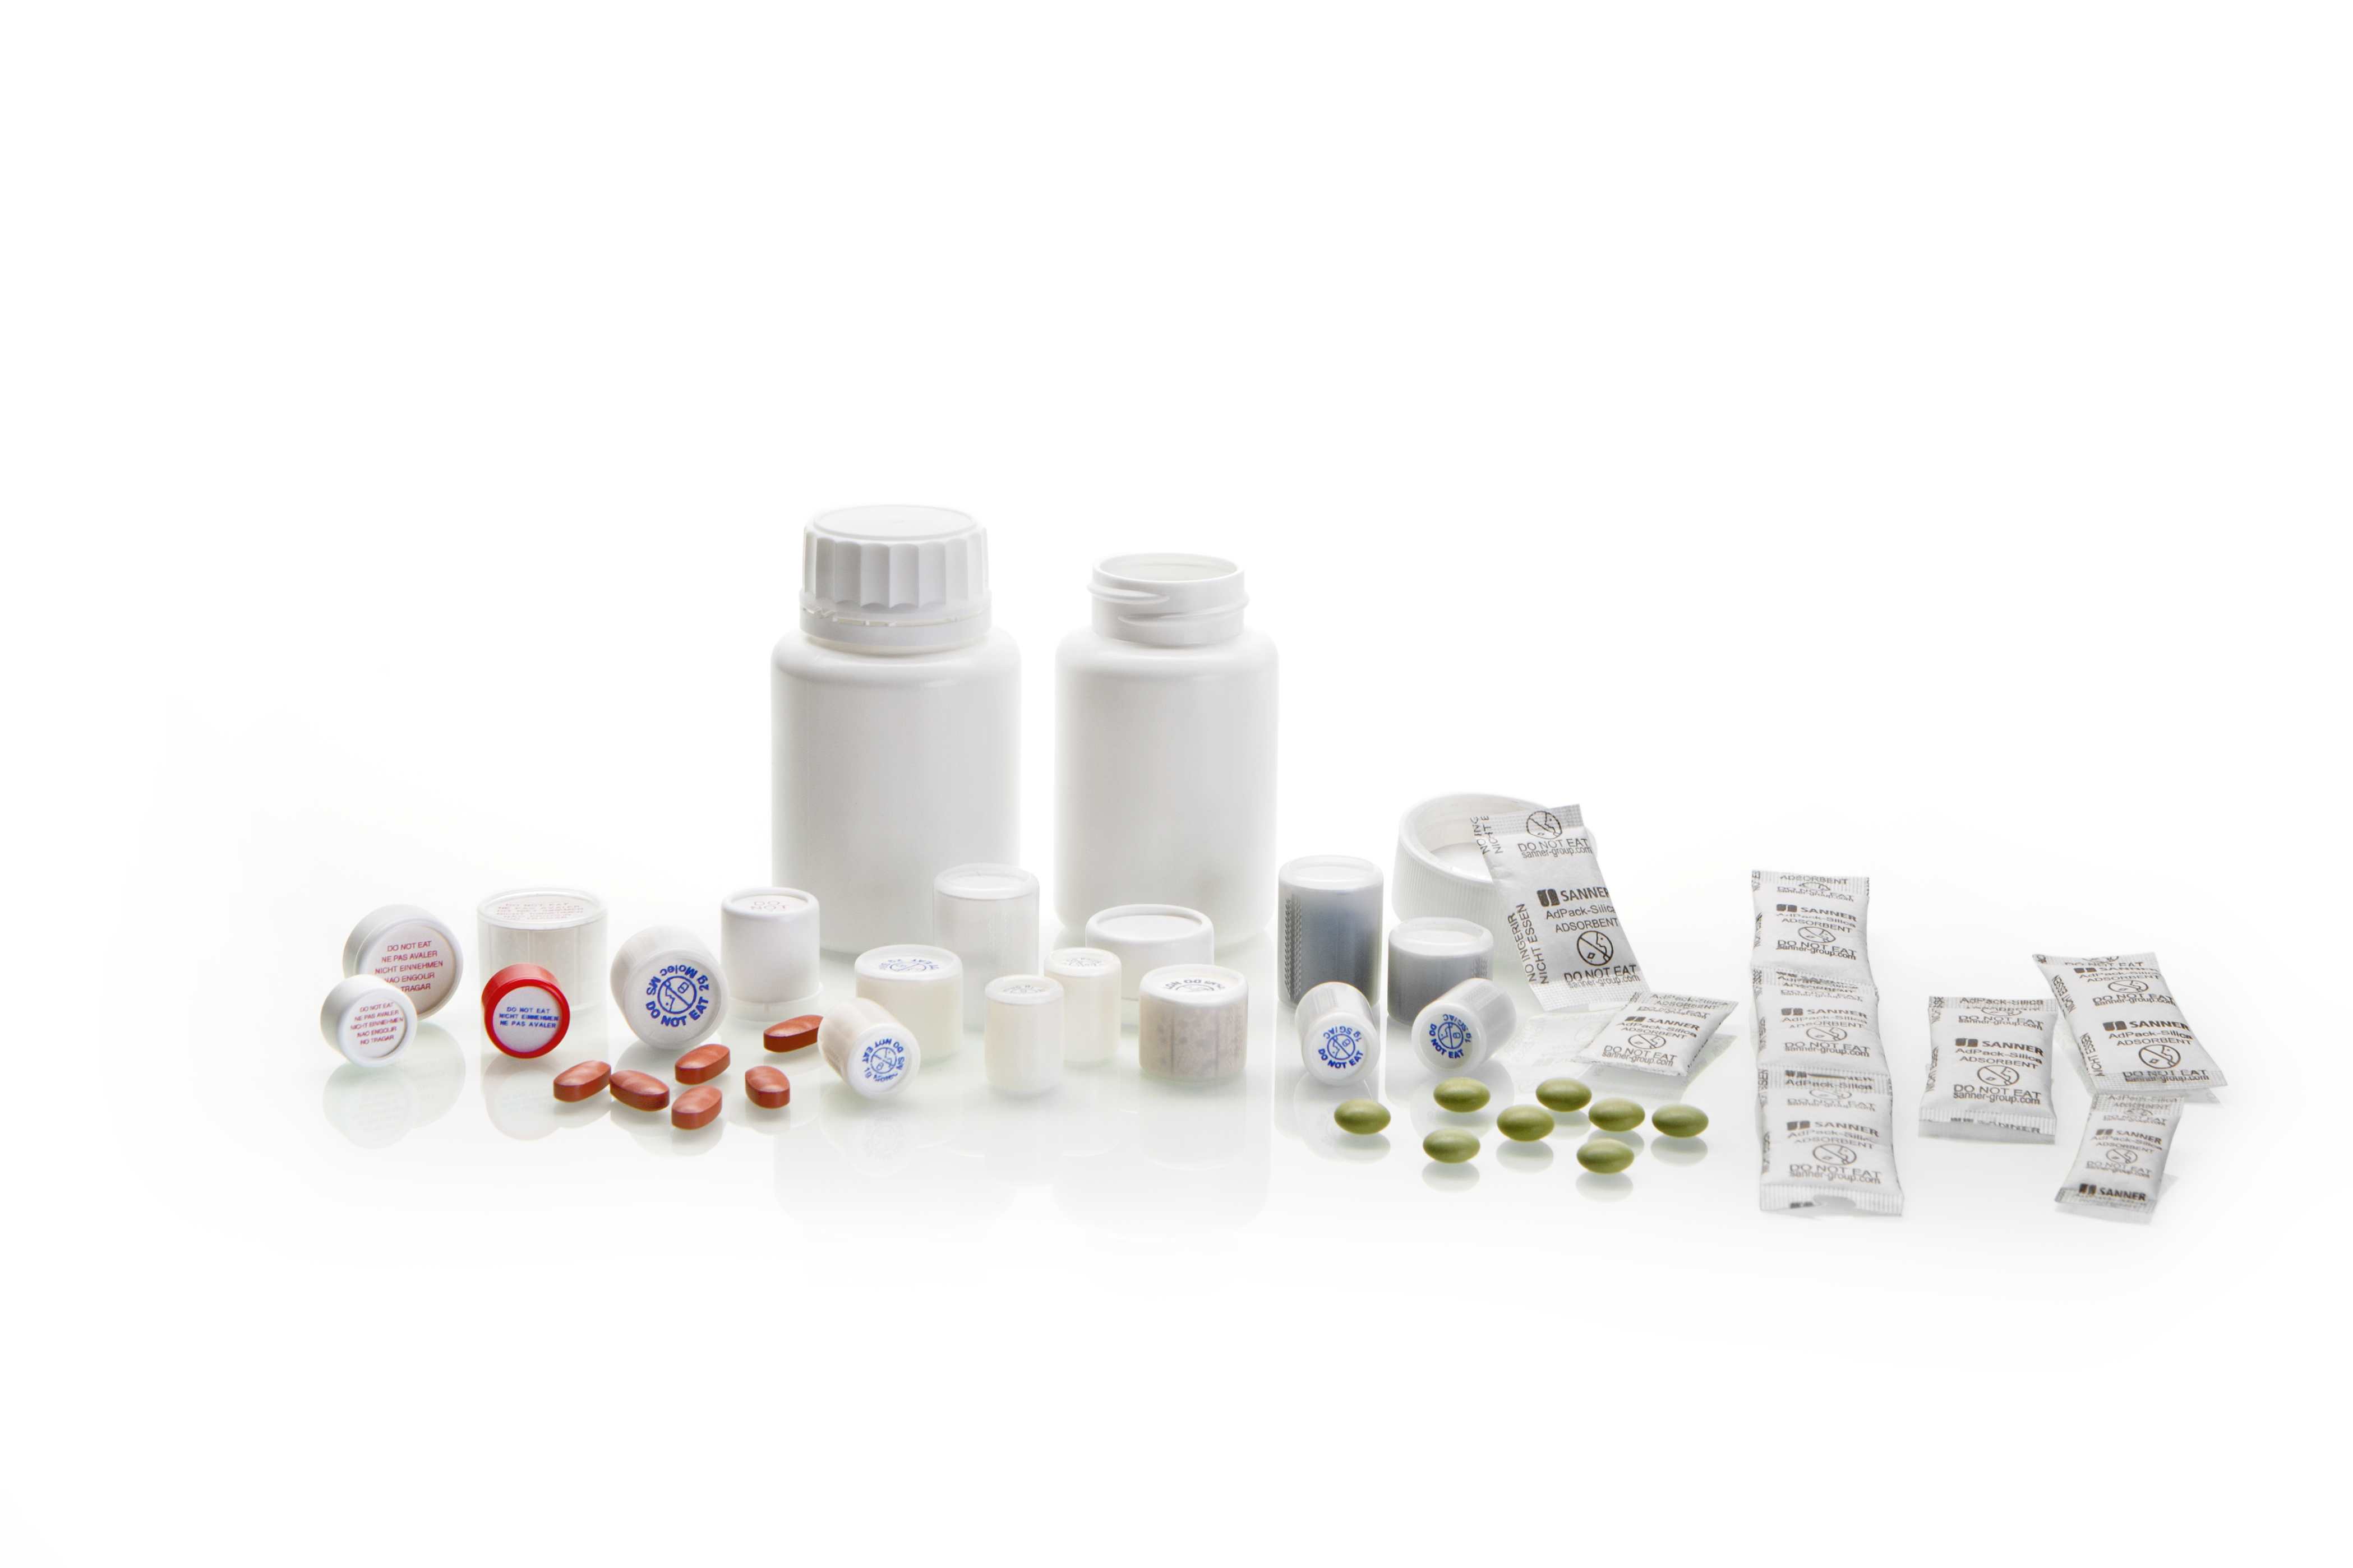 AdPack® Desiccant Packets and AdCap® Desiccant Canisters